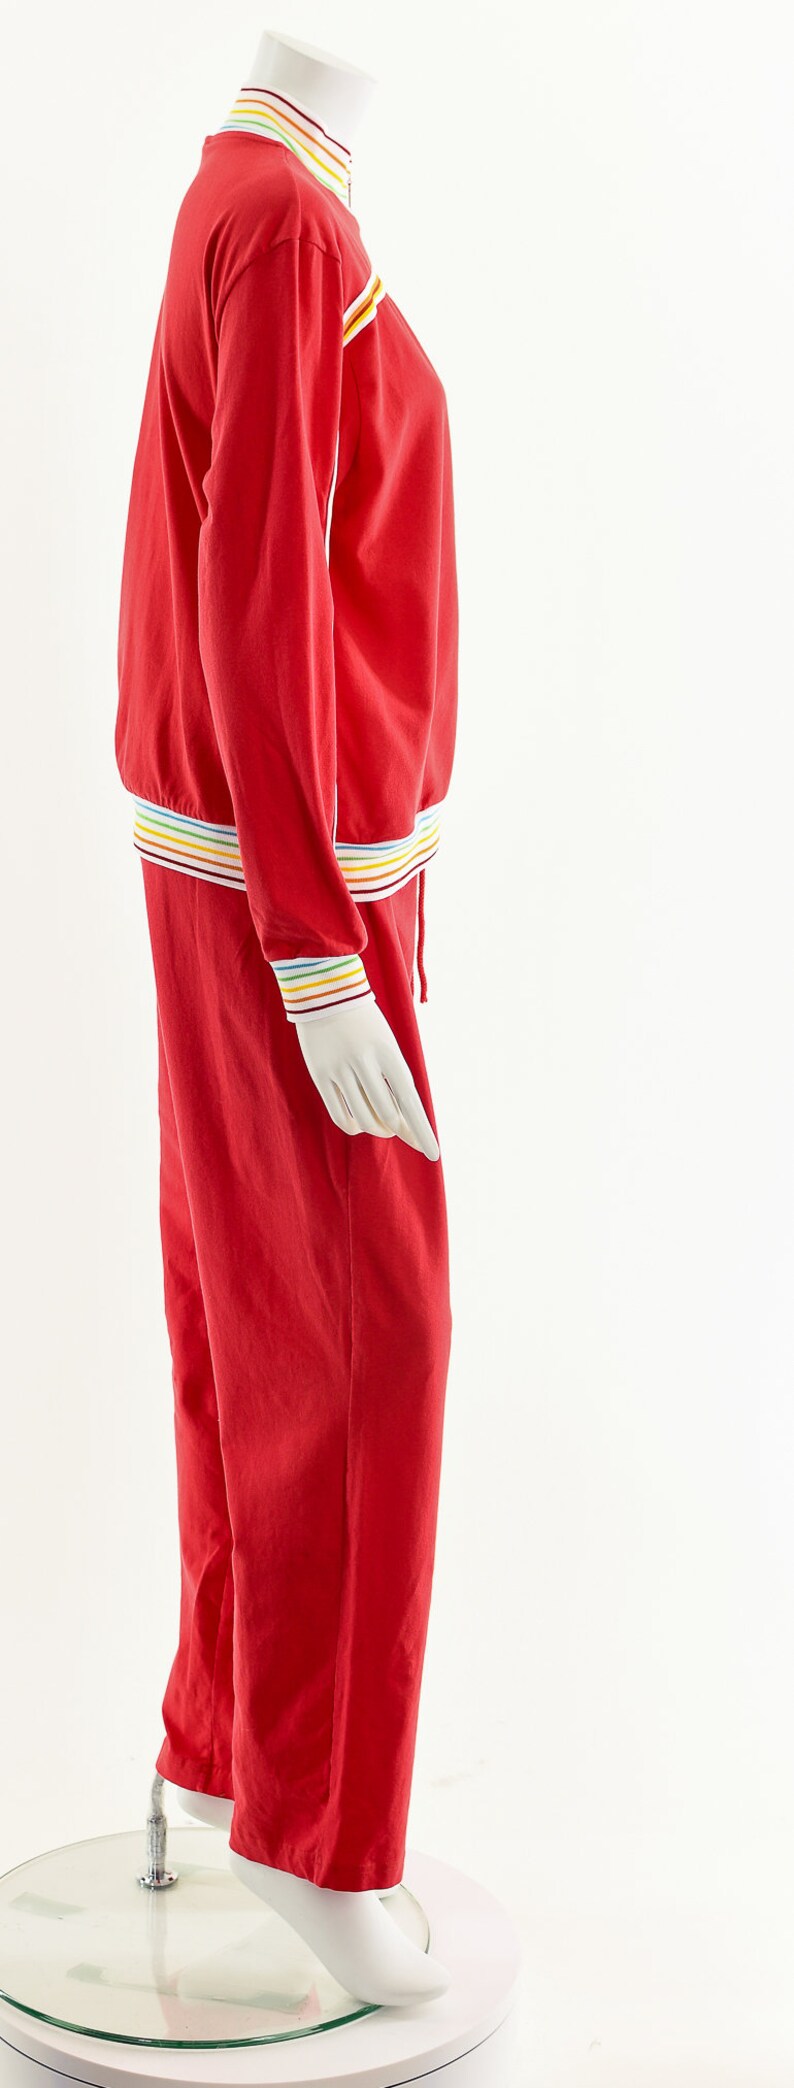 Red Rainbow Track Suit,Vintage Rainbow Jumpsuit,70s Inspired Two Piece,Juicy Couture Inspired,Juicy Couture Track Suit,Vintage Loungewear image 5